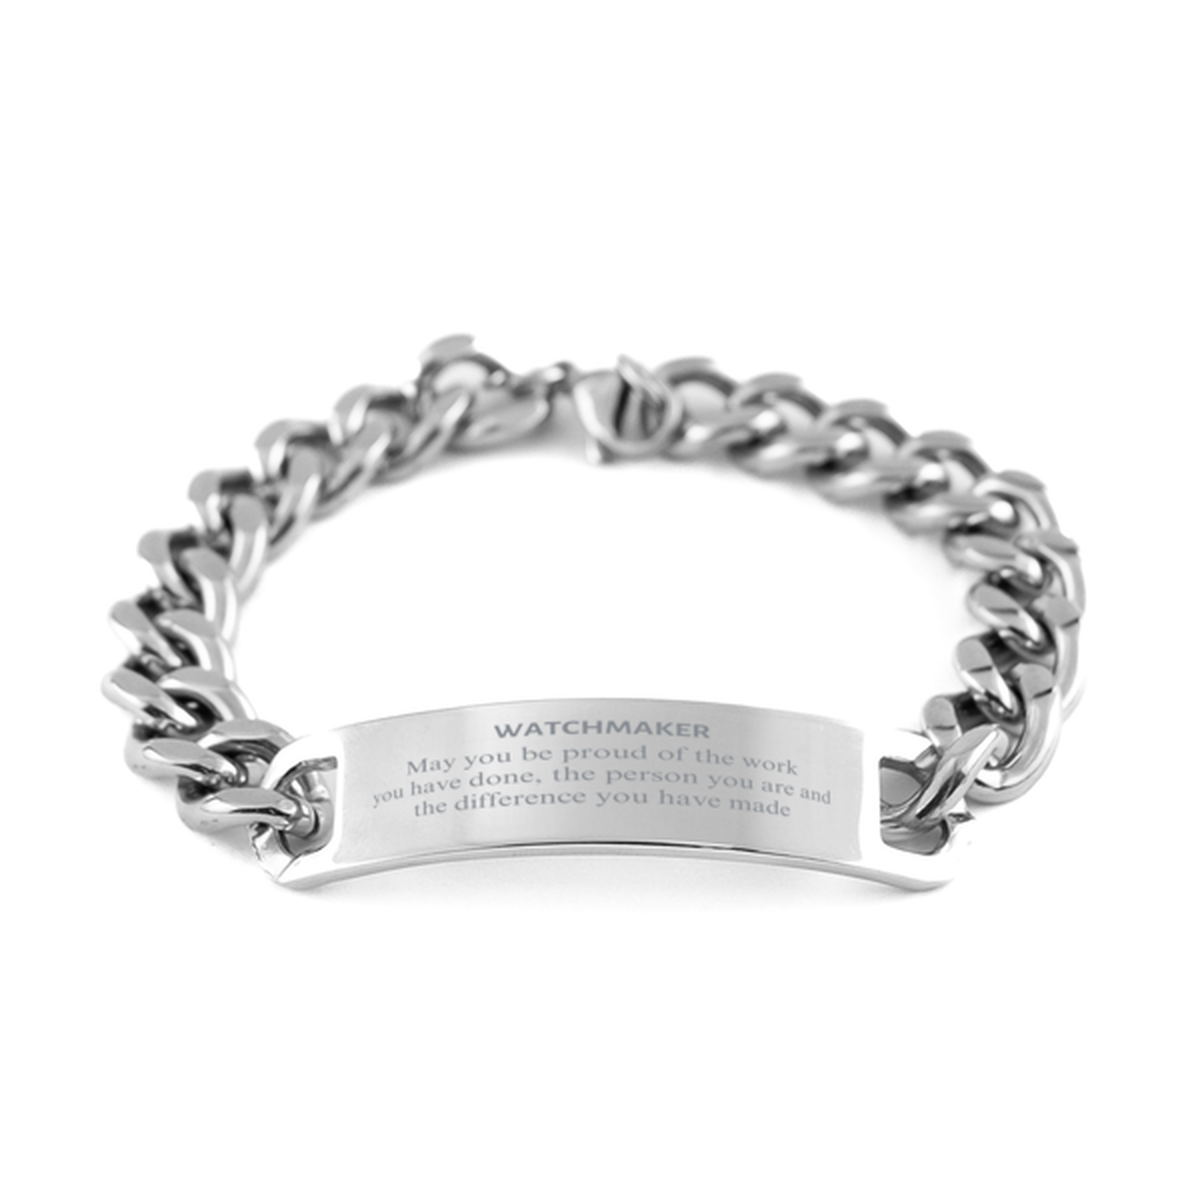 Watchmaker May you be proud of the work you have done, Retirement Watchmaker Cuban Chain Stainless Steel Bracelet for Colleague Appreciation Gifts Amazing for Watchmaker